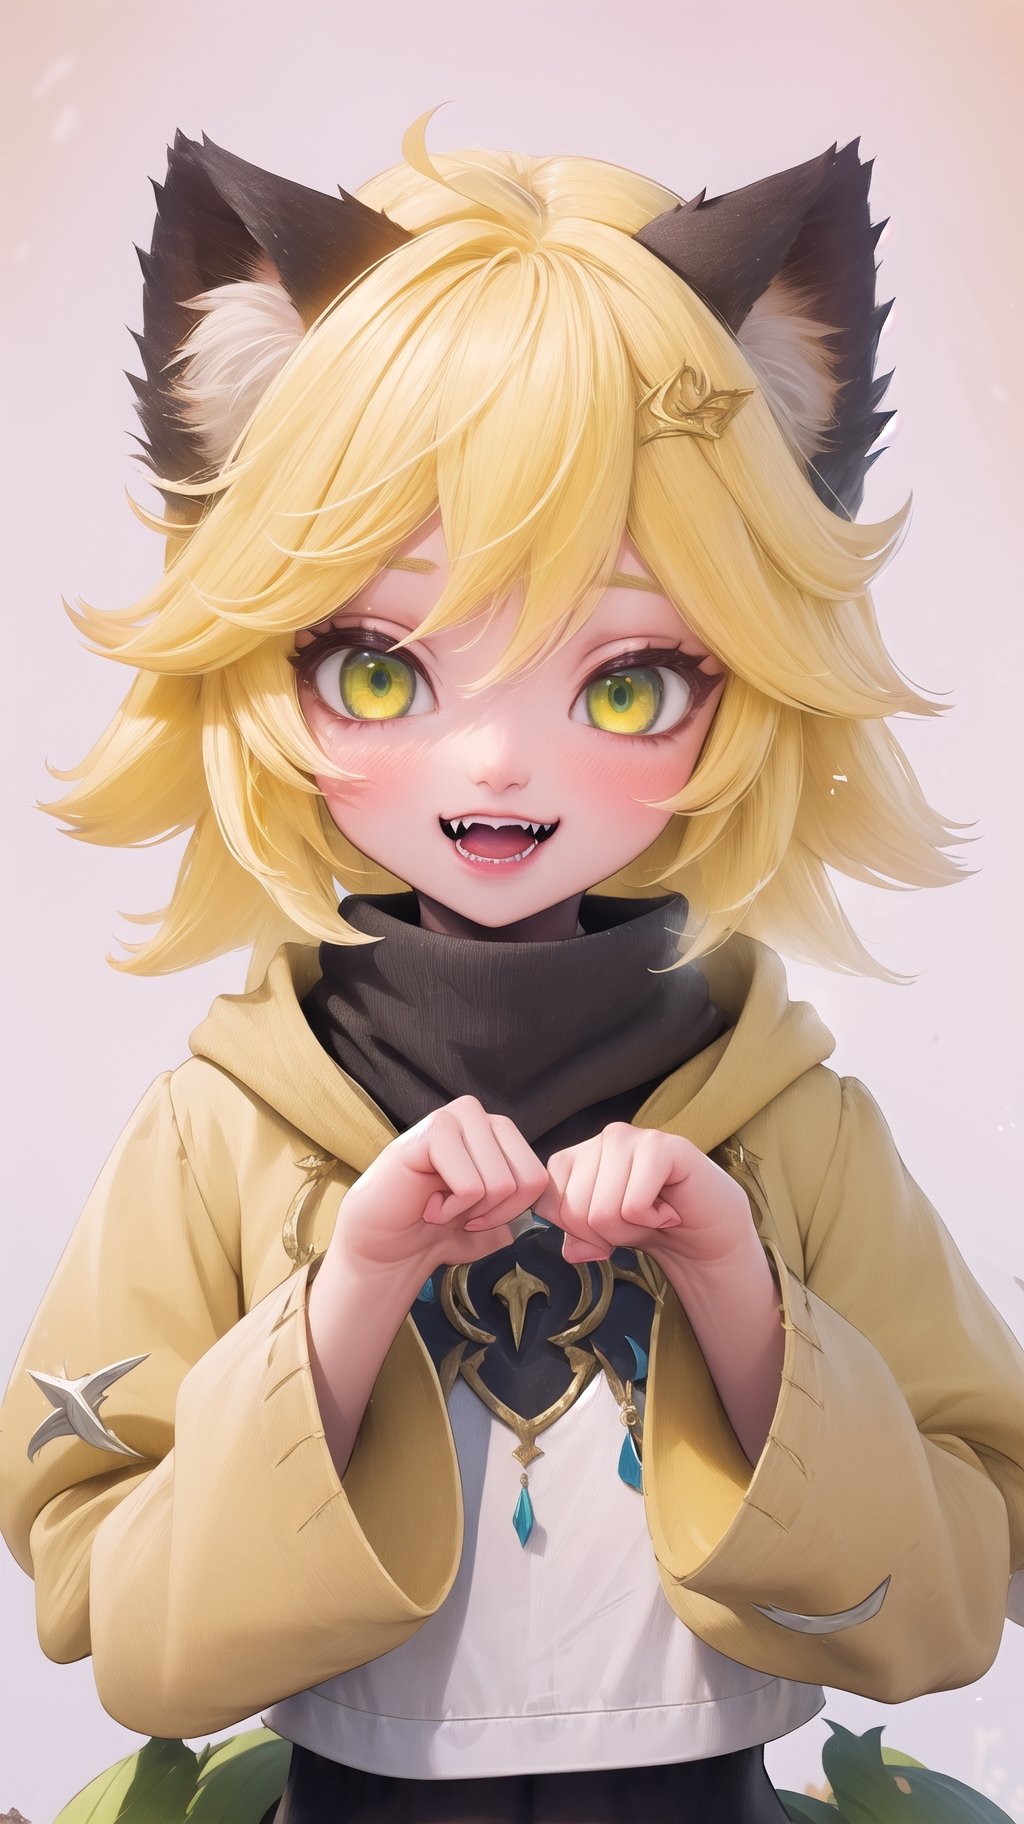 (masterpiece, top quality), intricate details, thin, ((slim)), beautiful girl, teenage woman, Yellow hair, white skin, light yellow eyes, cat ears, sharp jawline, cropped jacket, messy hair, lips , fangs, upper body, almost awake, grinning, happy, excited pet pose